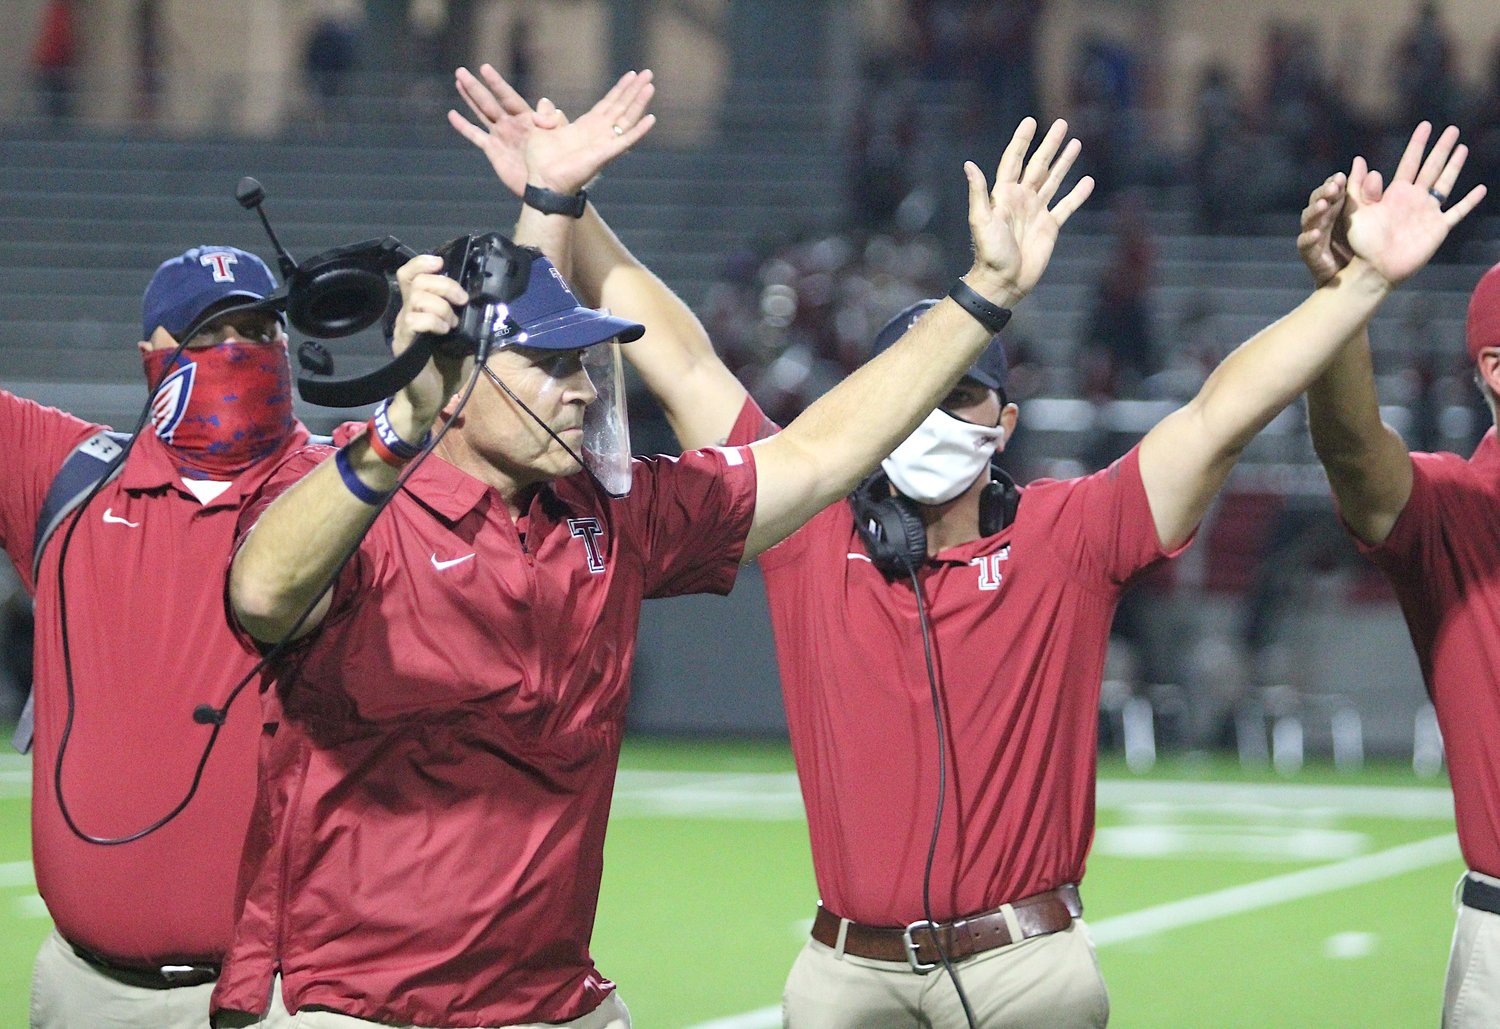 Following his team's 24-19 win over Katy on Nov. 5, Coach Todd McVey (front) and the Tompkins Falcons are now ranked No. 7 in the state and No. 25 nationally.